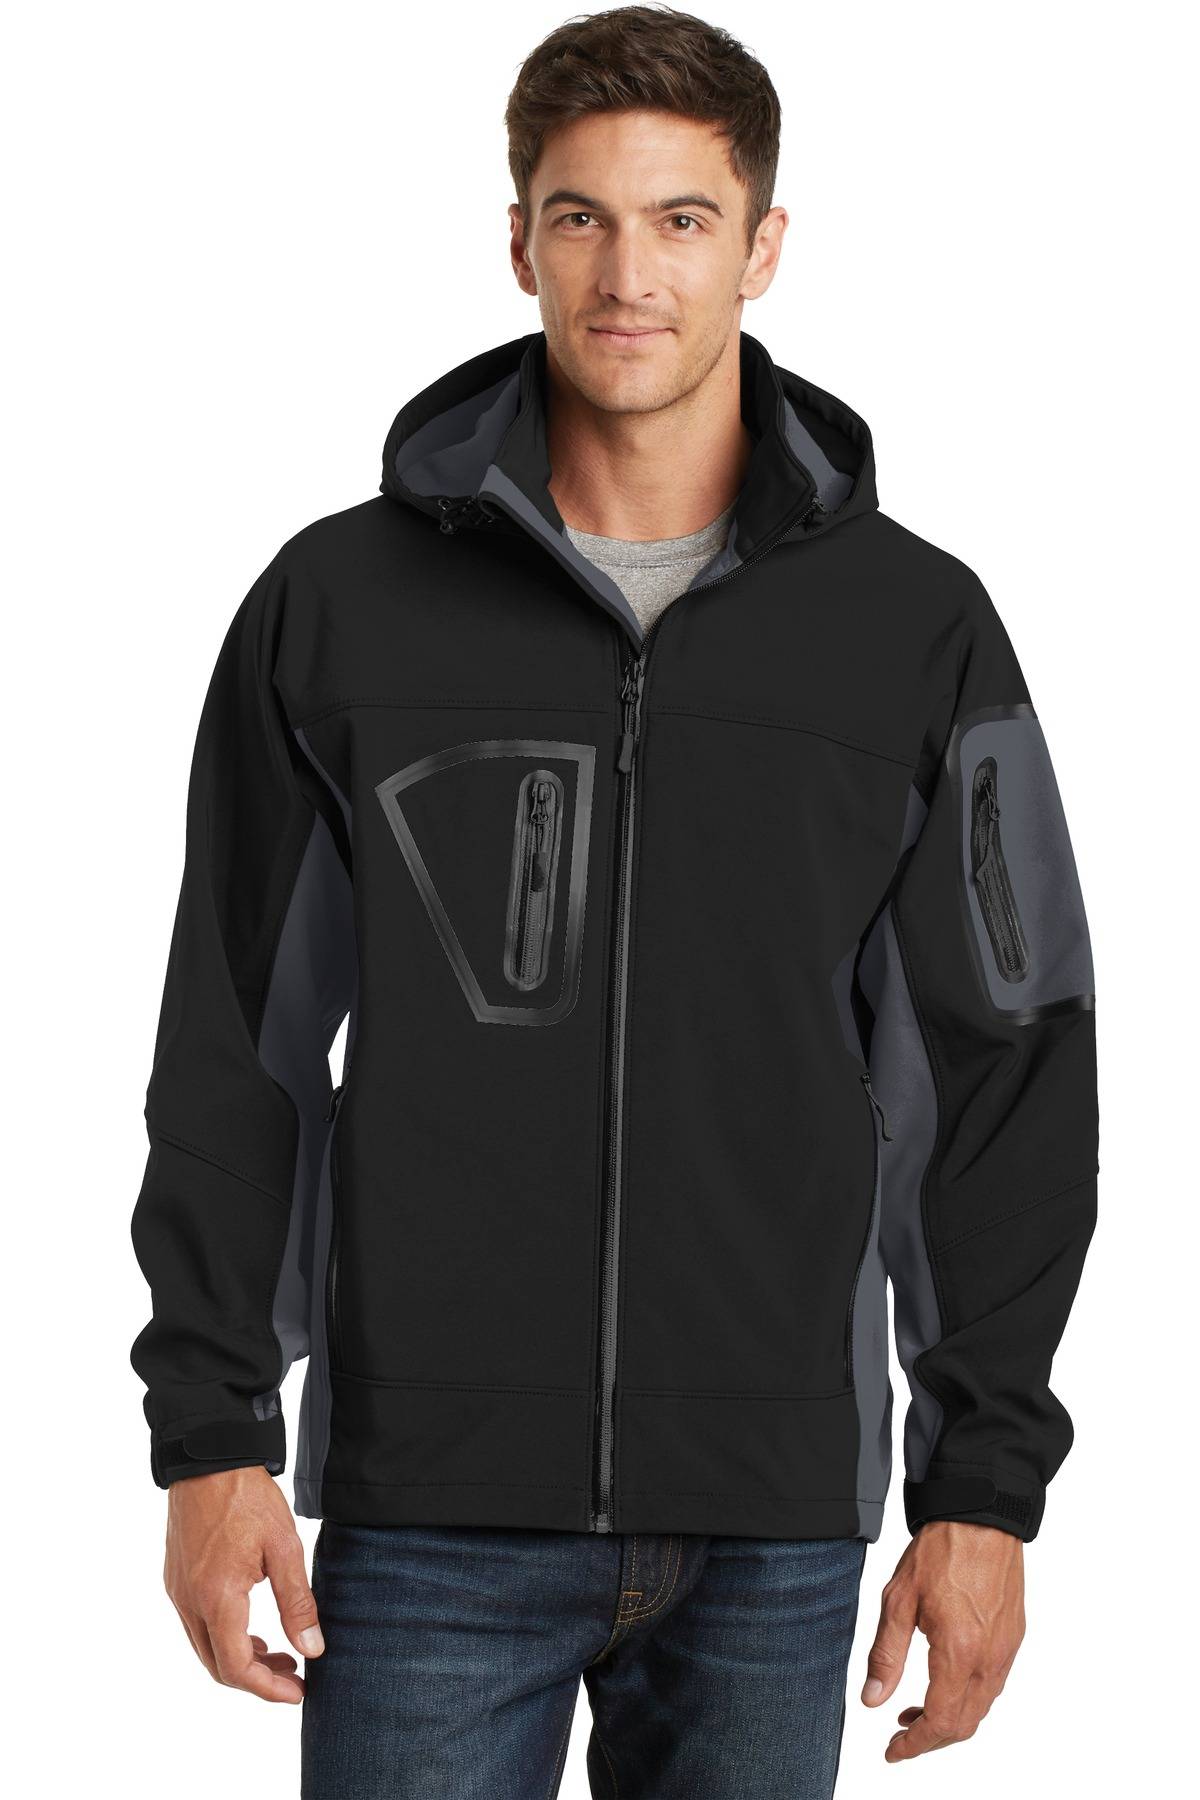 Port Authority TLJ798 Mens Big And Tall Long Sleeve Waterproof Soft Shell Jacket With Pockets